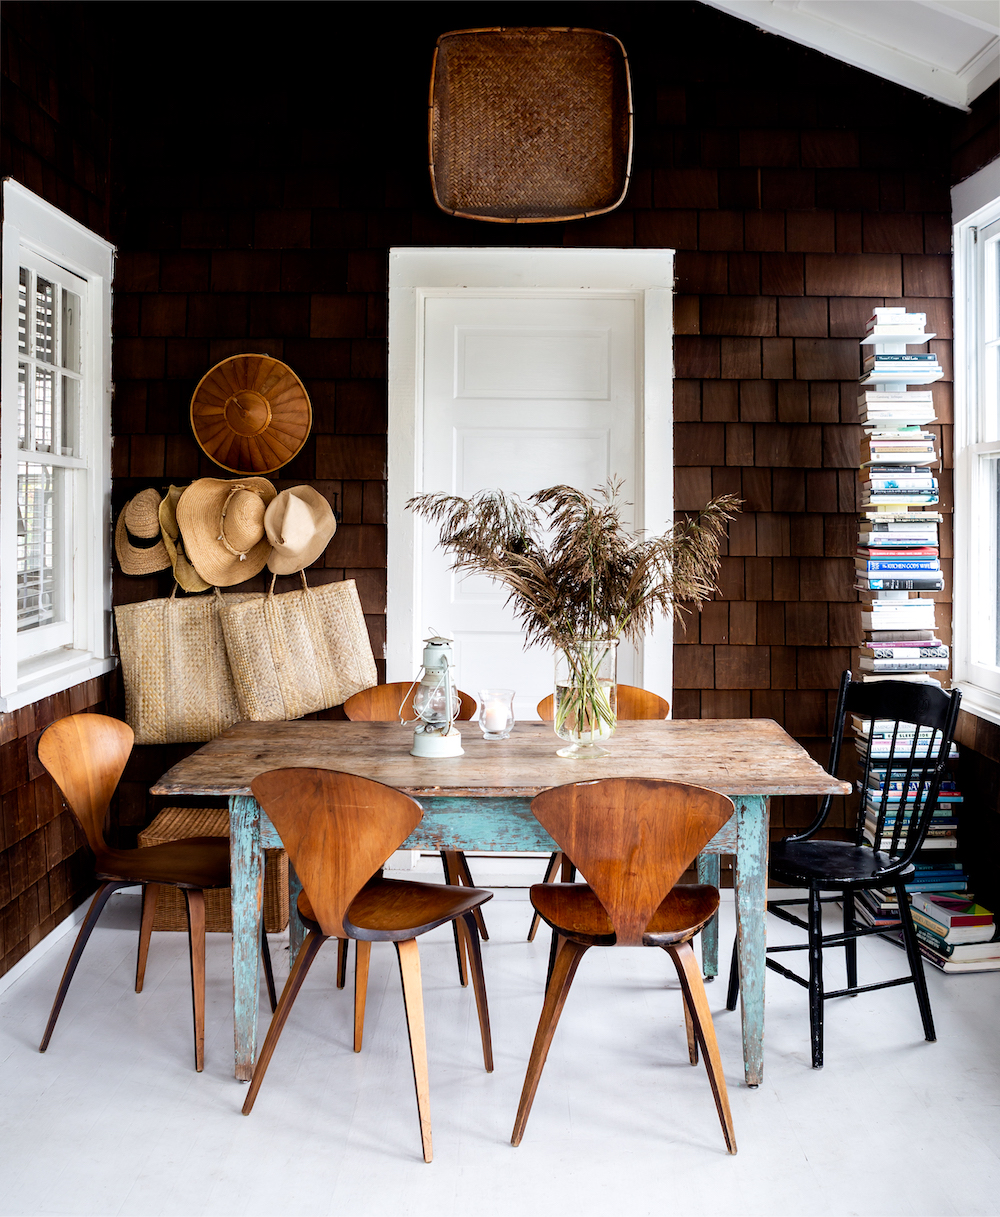 a bright and airy rustic coastal home on fire island